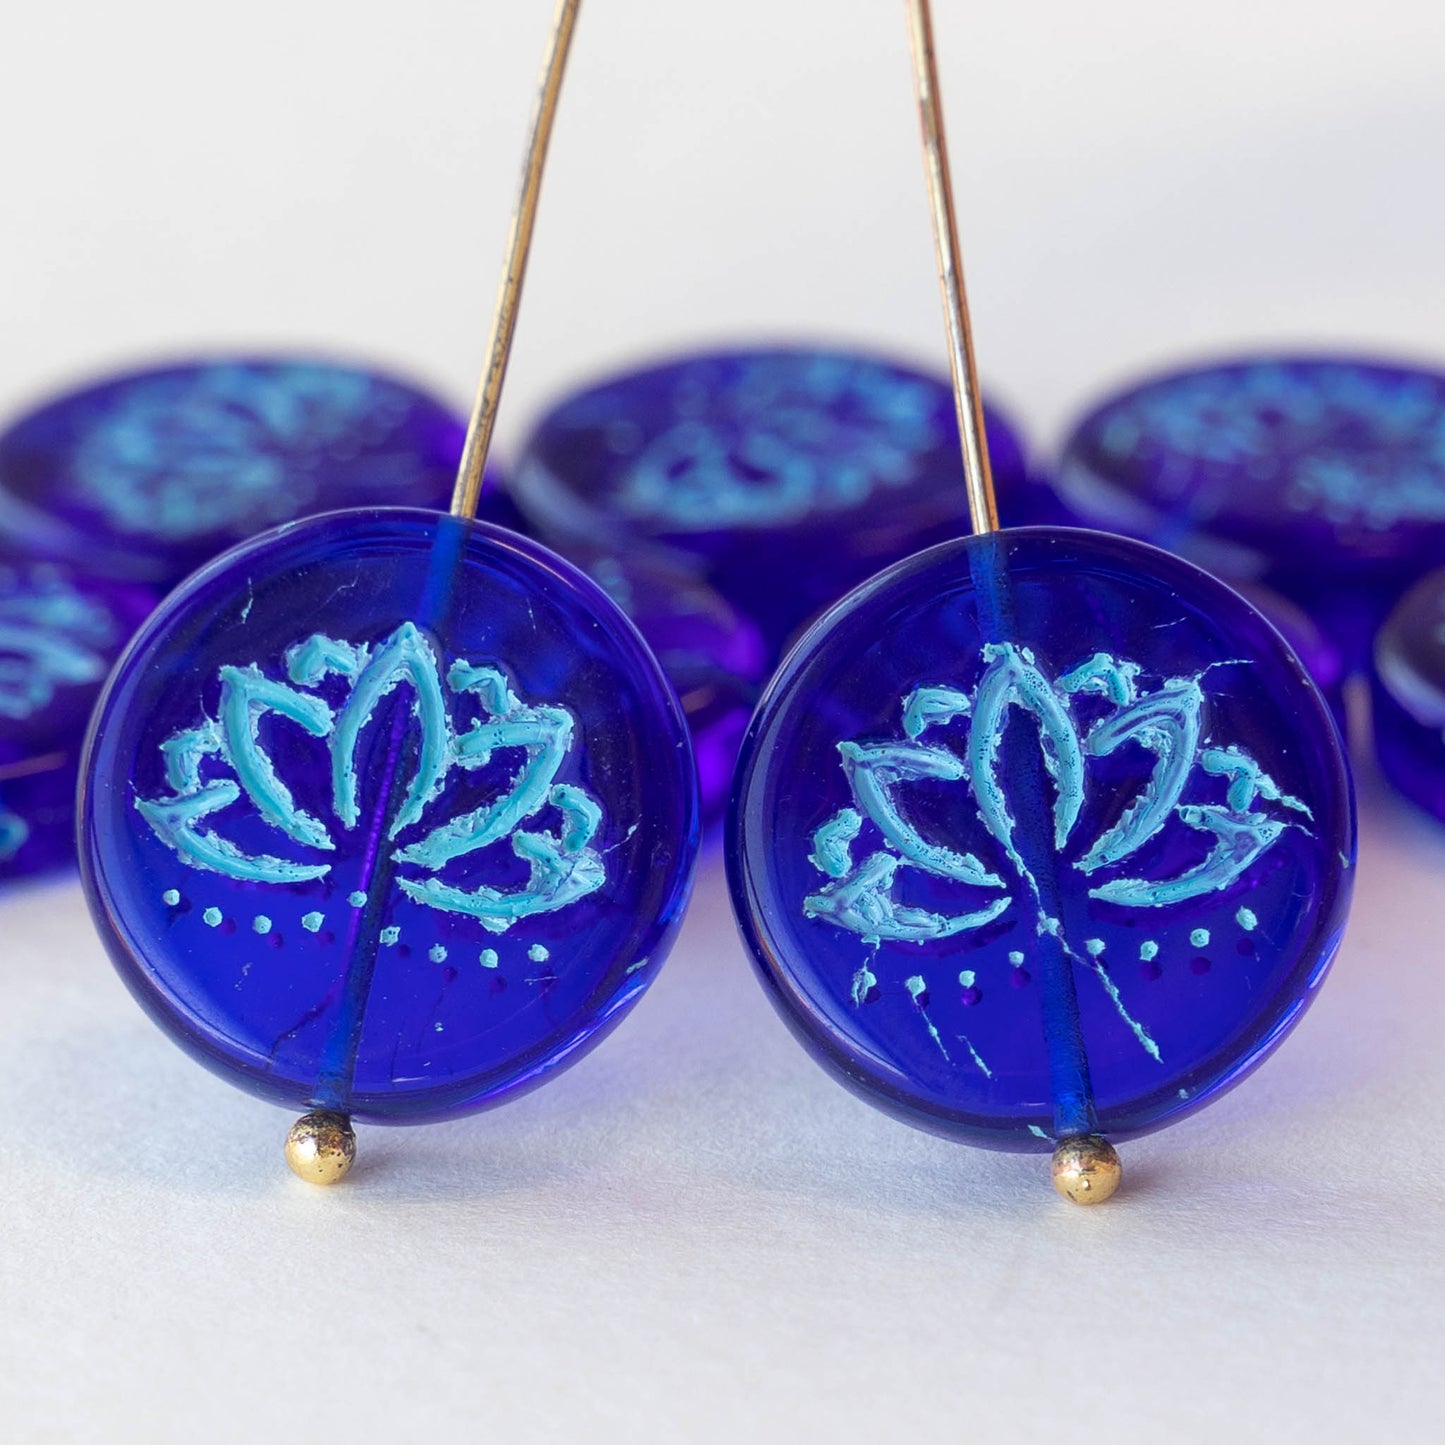 18mm Lotus Flower Beads - Blue on Blue - 4 or 12